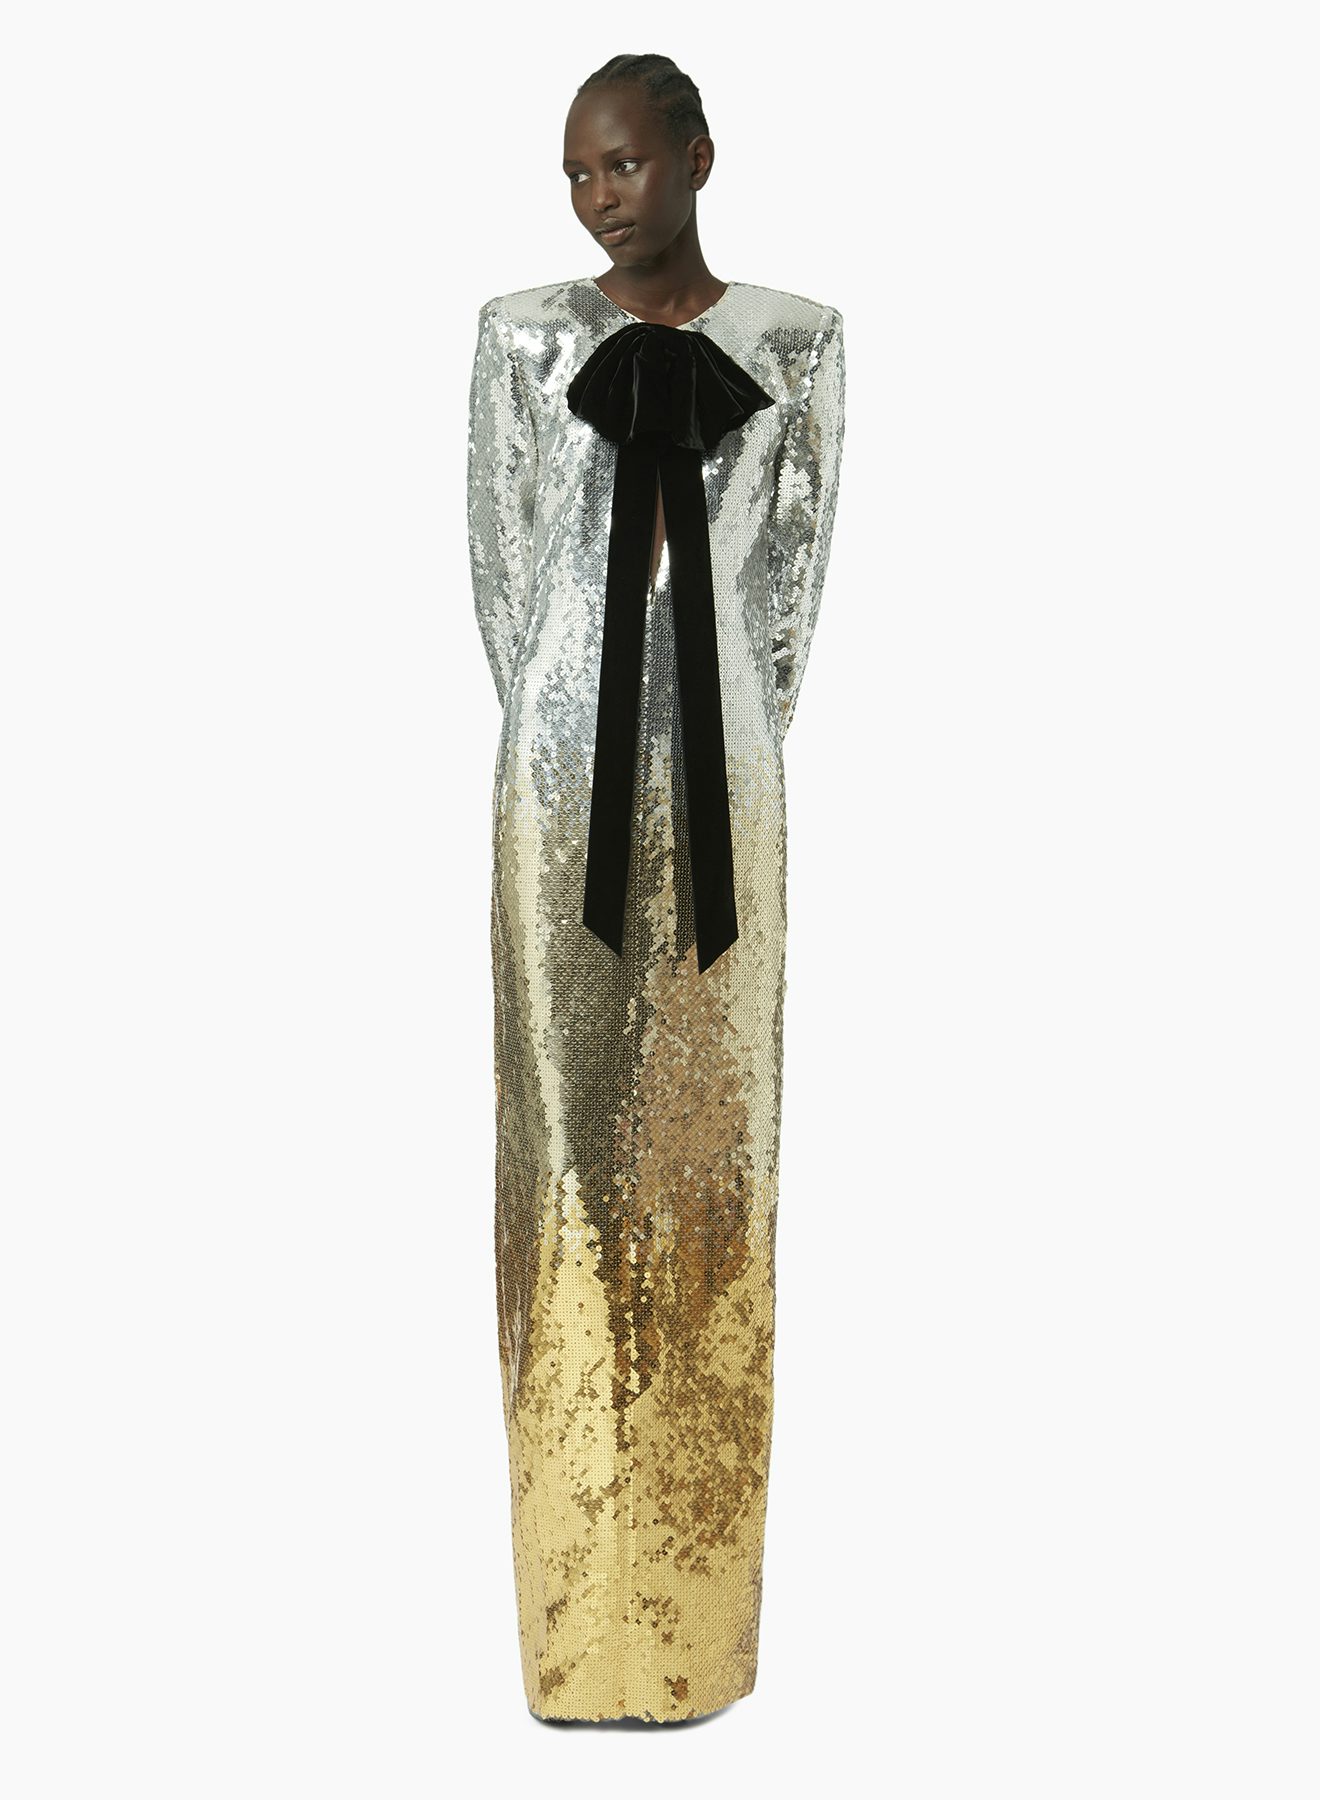 Long sequin dress in gold and silver - Nina Ricci